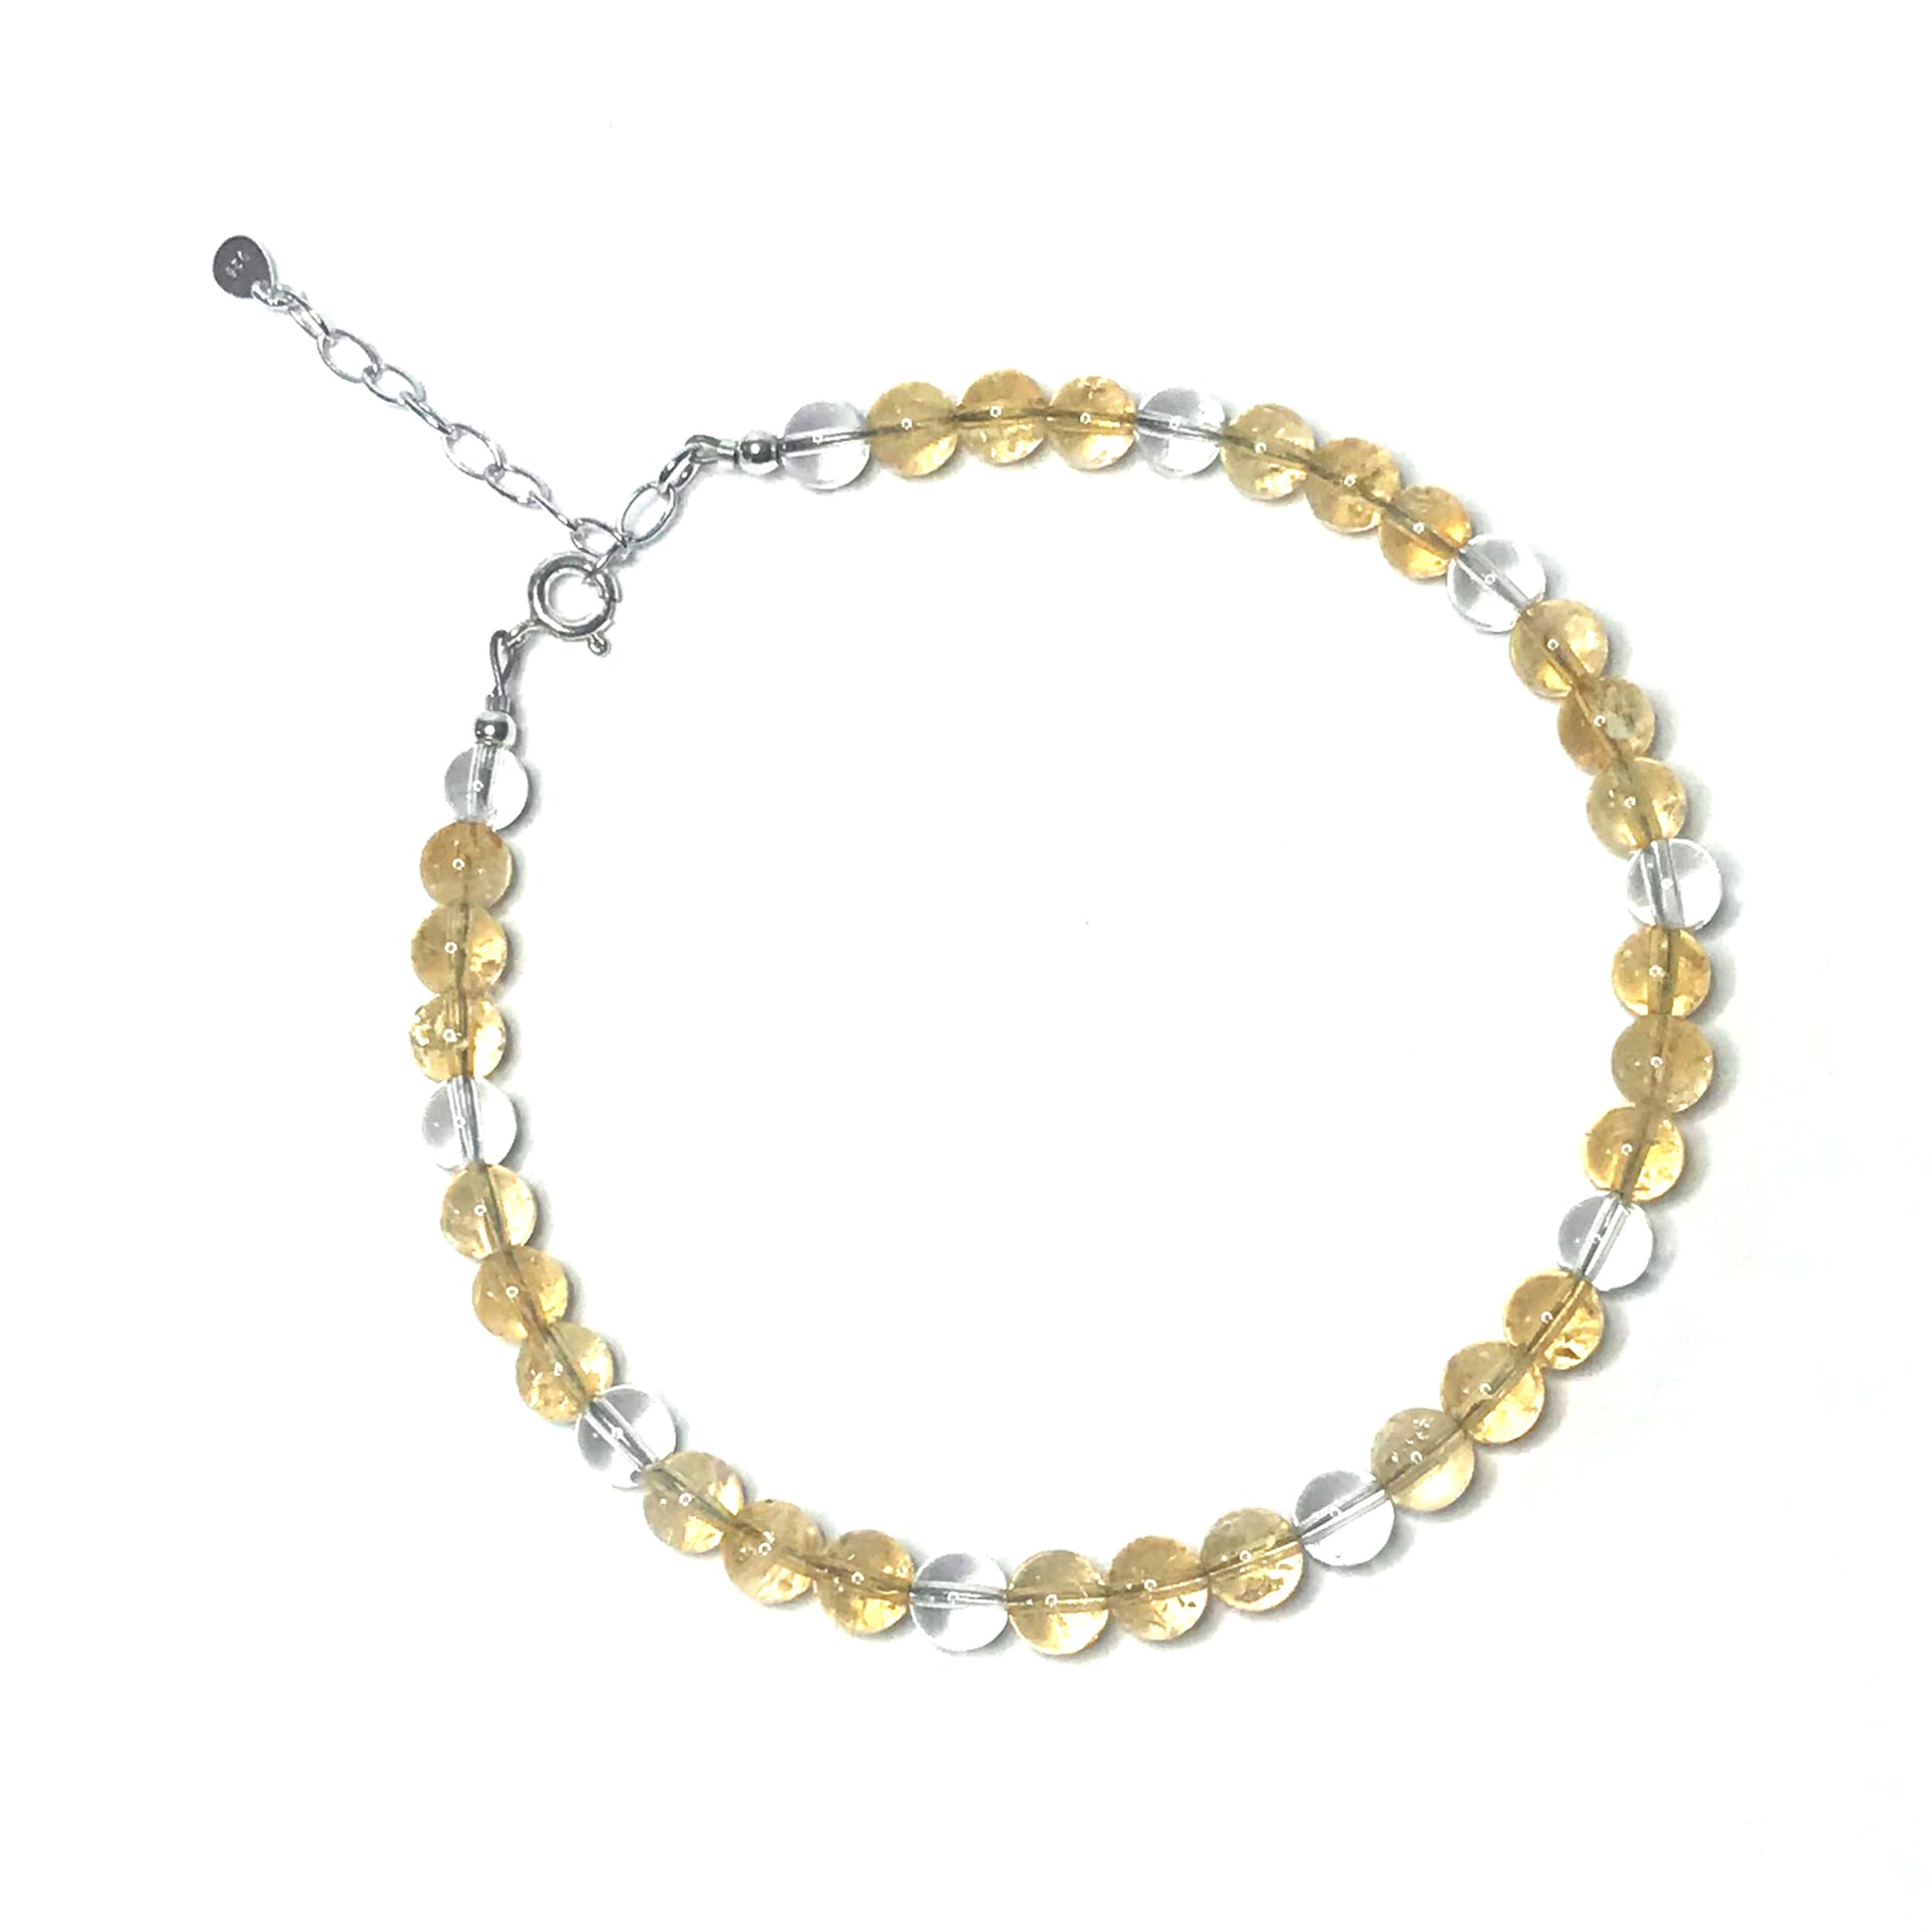 Citrine anklet with sterling silver extender chain